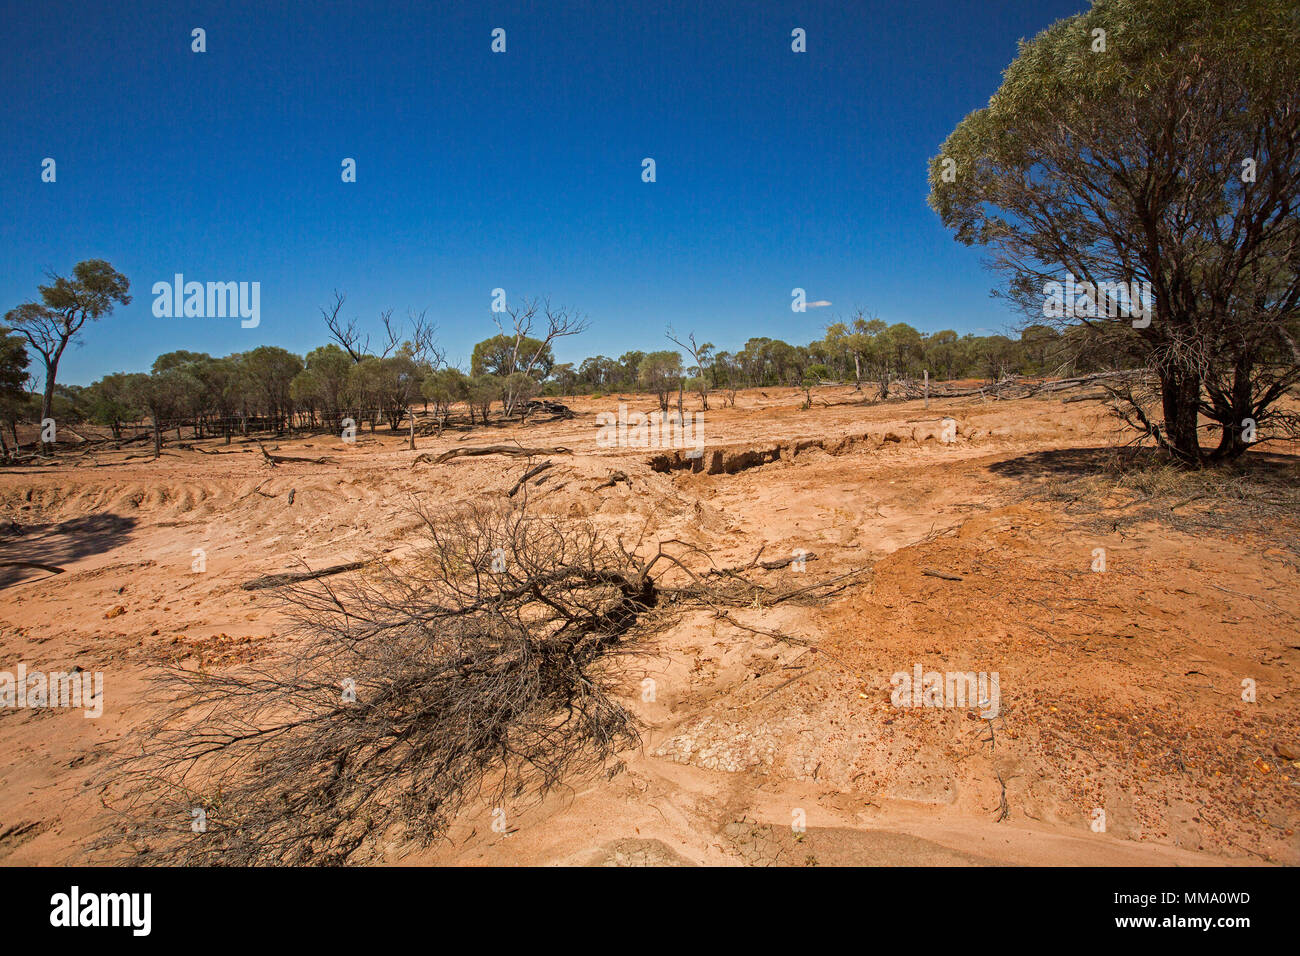 Severely eroded landscape with bare red soil cleared of trees and remaining trees in background under blue sky in outback Queensland Australia Stock Photo